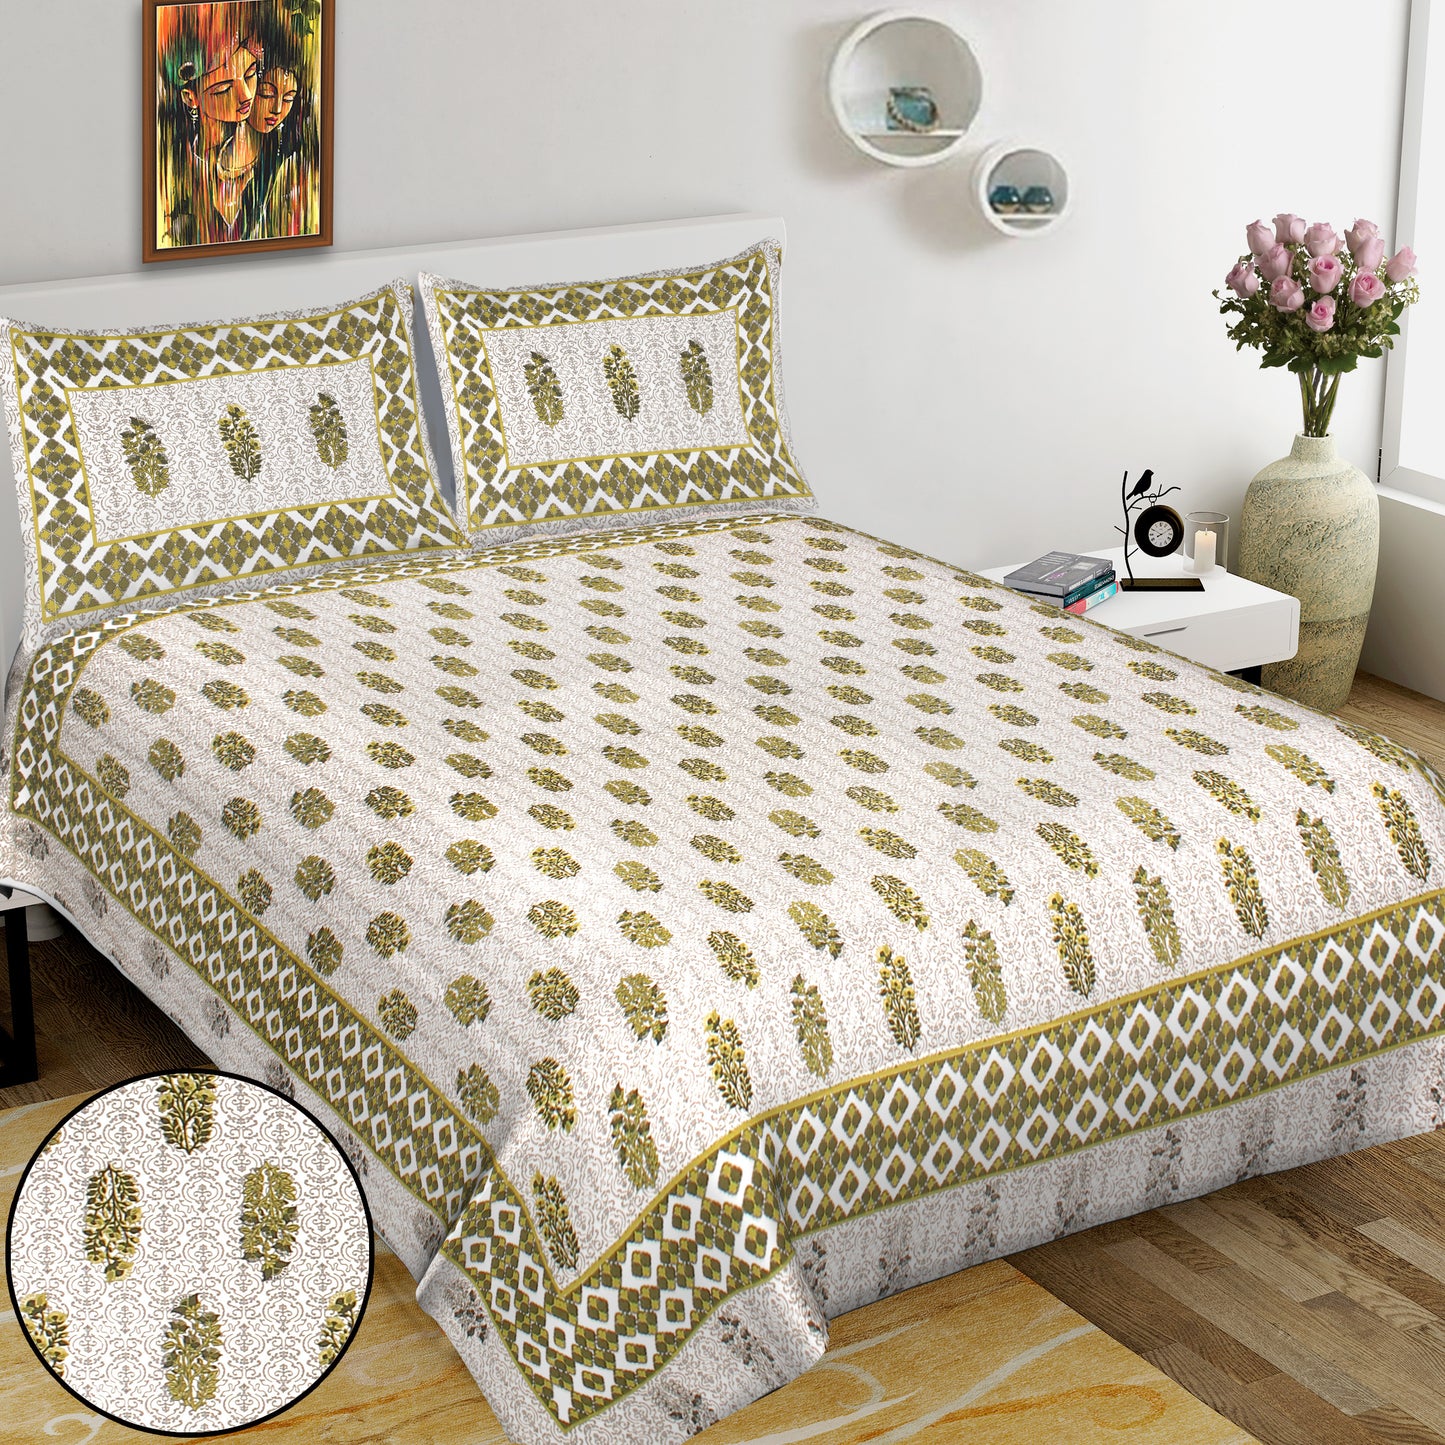 Jaipuri Bedsheet 100% Cotton Rajasthani Traditional Super King Size  Bedsheet with 2 Pillow Cover 100*108 Alllemo